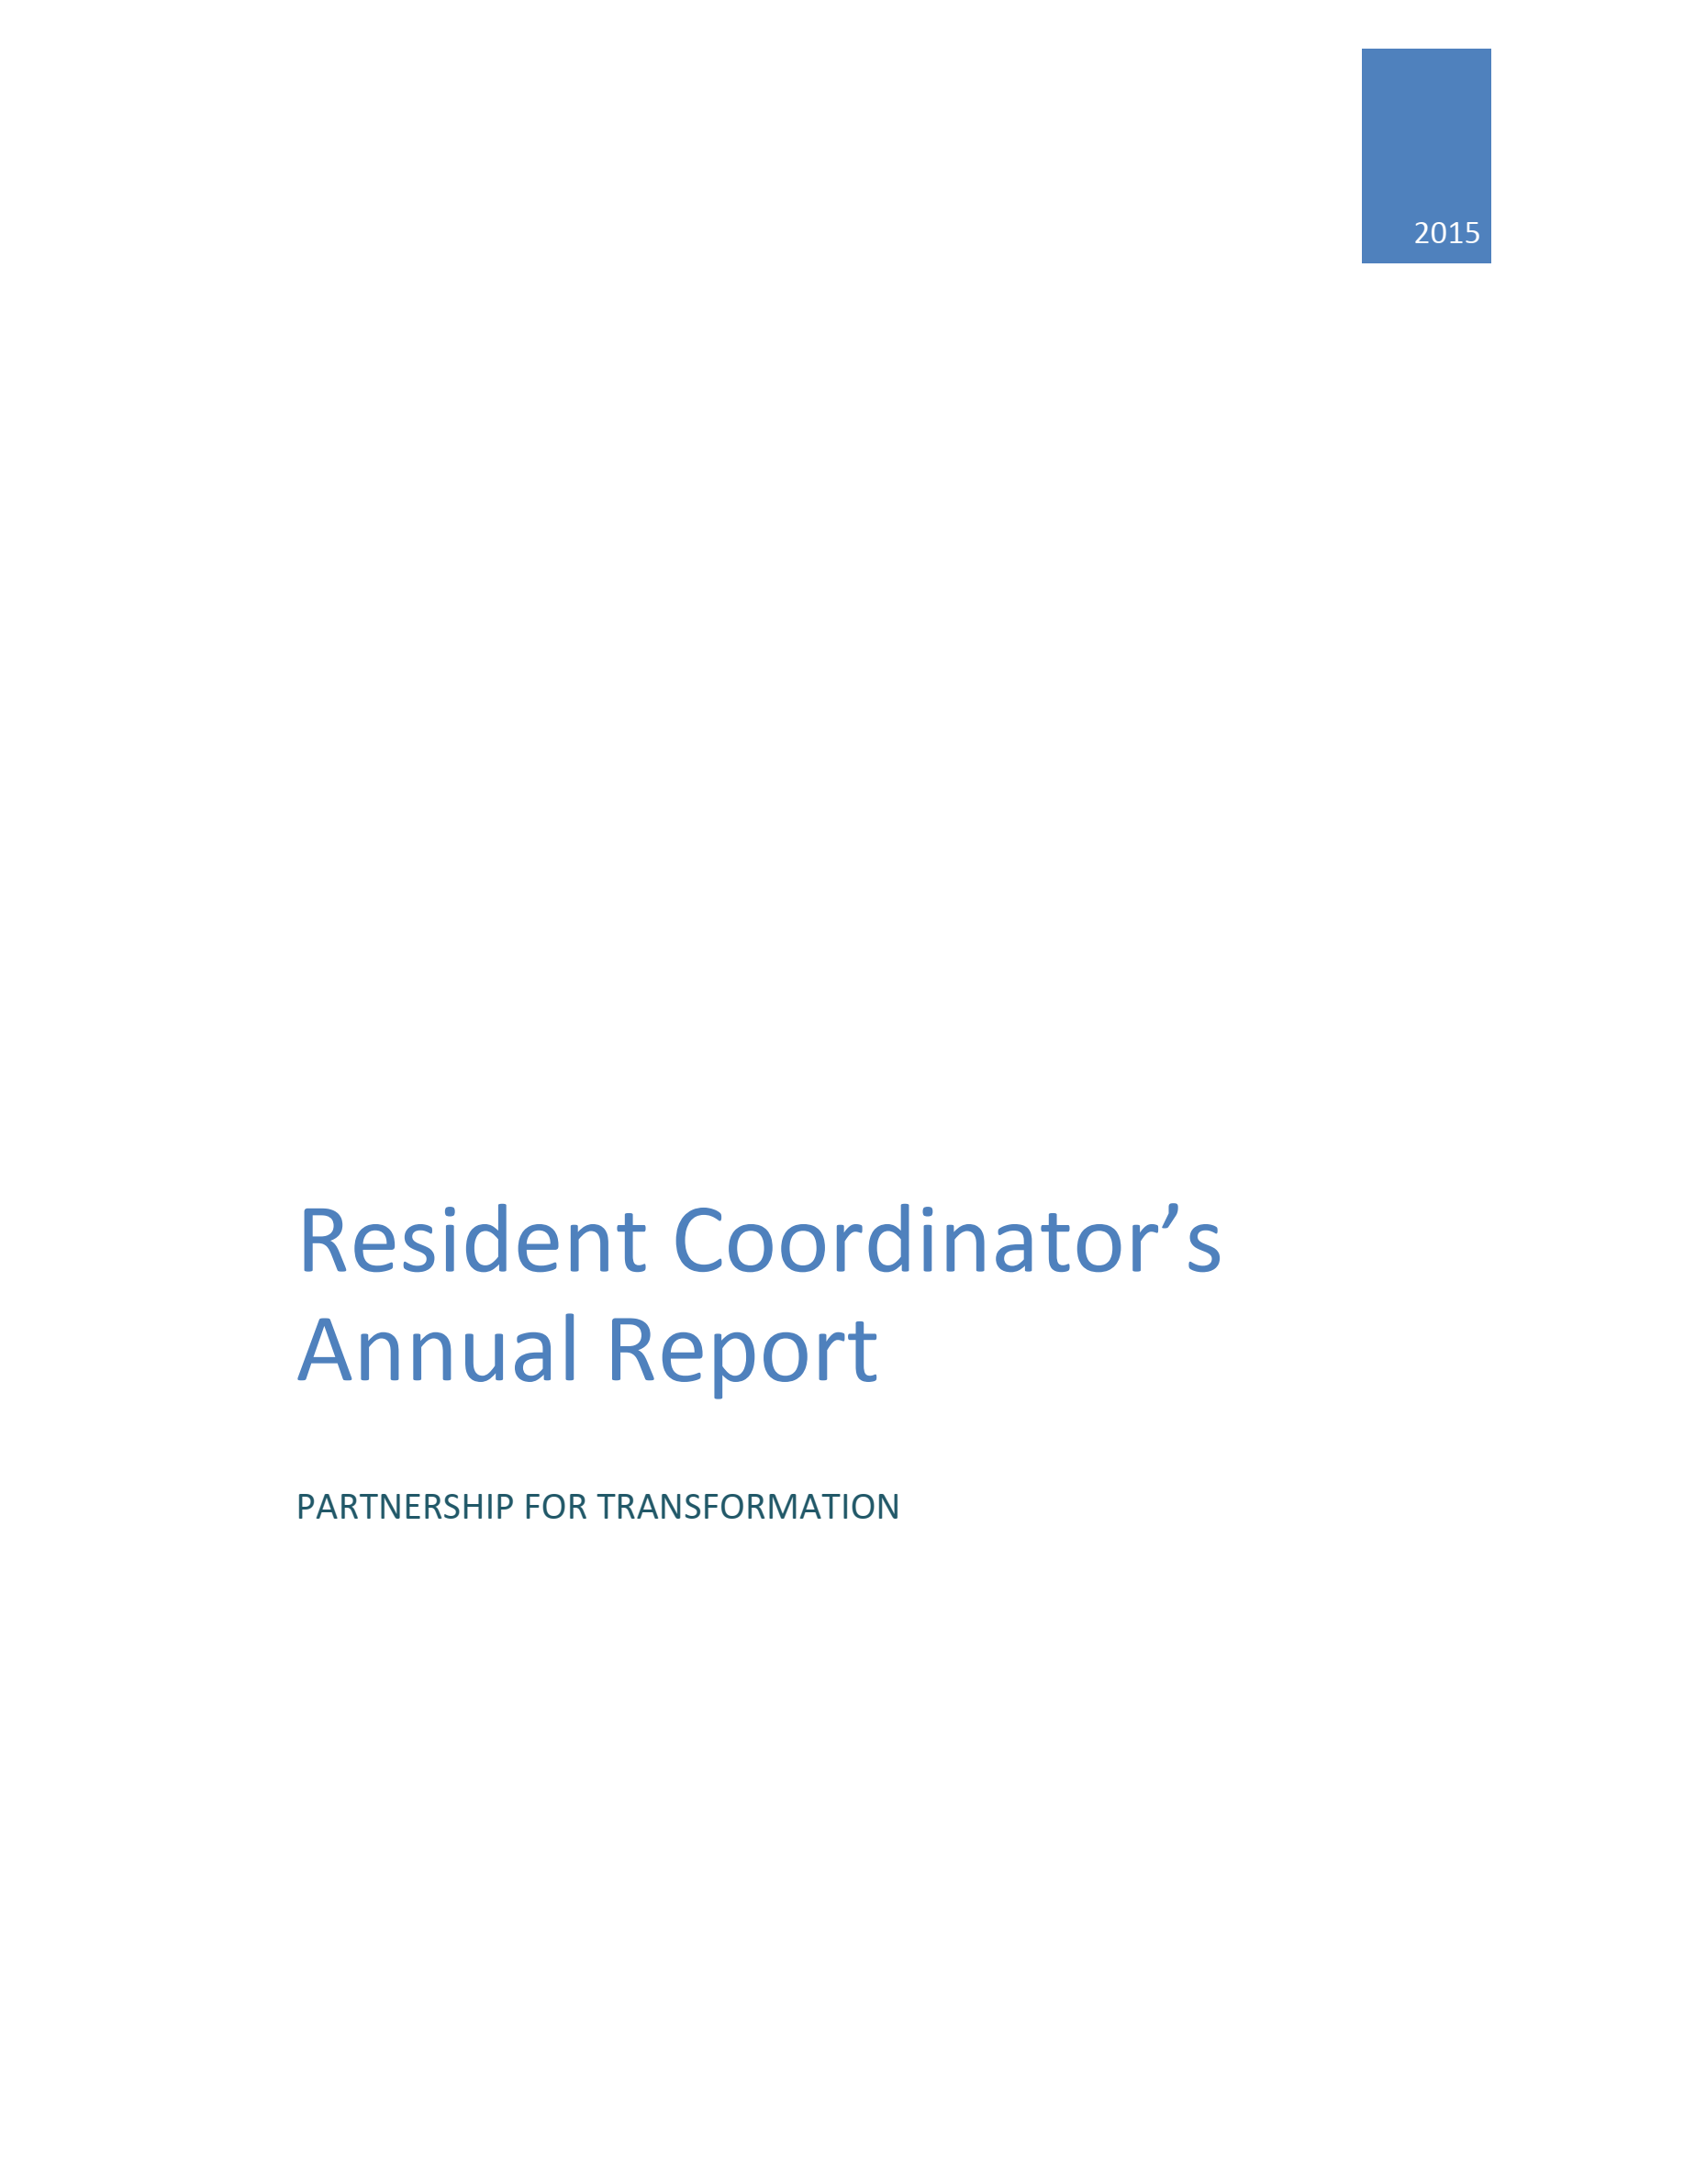 Resident Coordinator’s Annual Report 2015